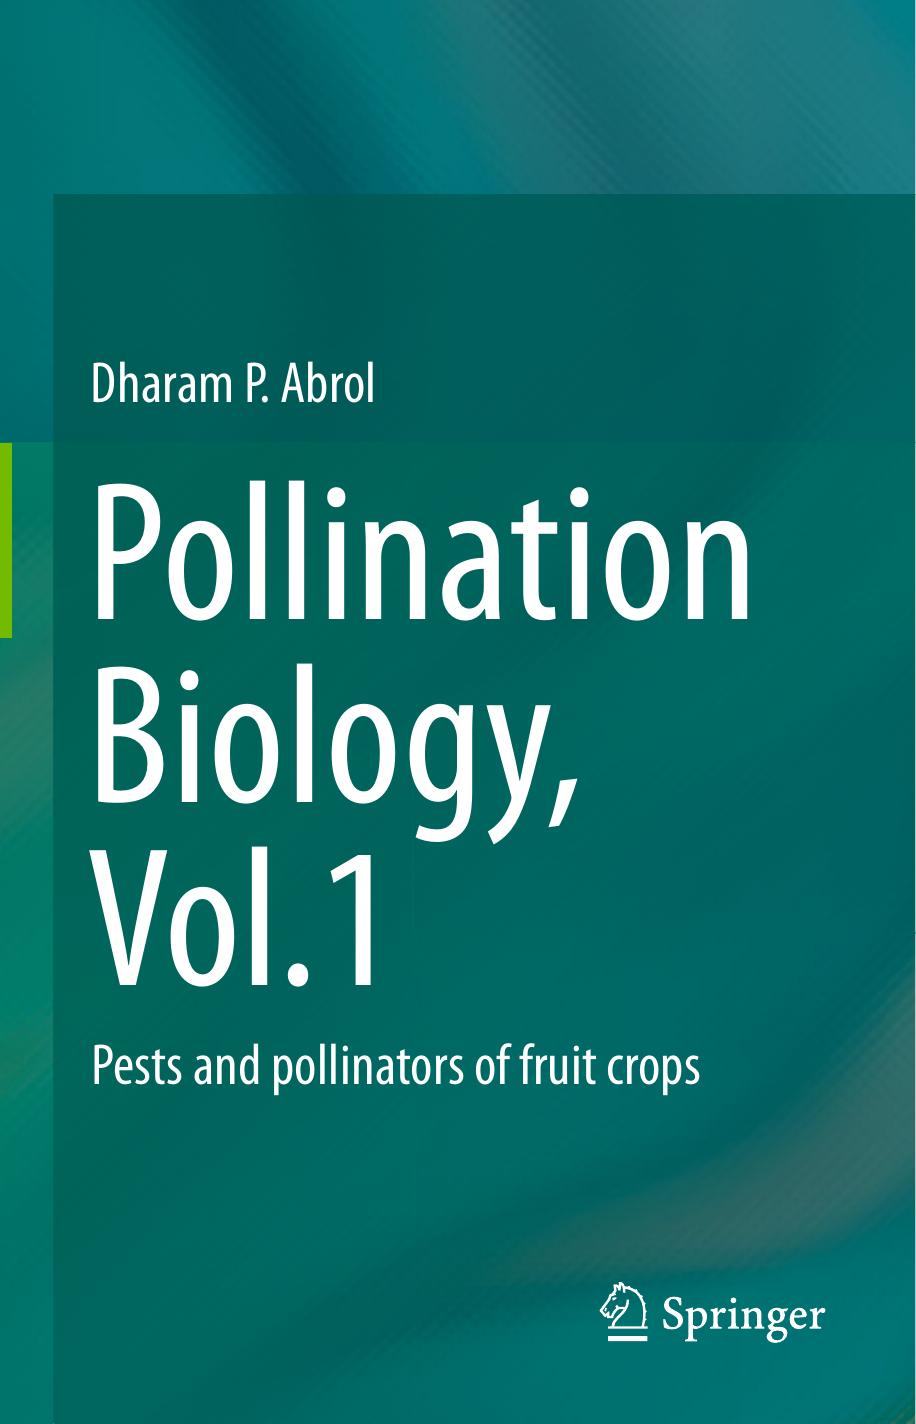 Pollination Biology, Vol.1 Pests and pollinators of fruit crops 2015